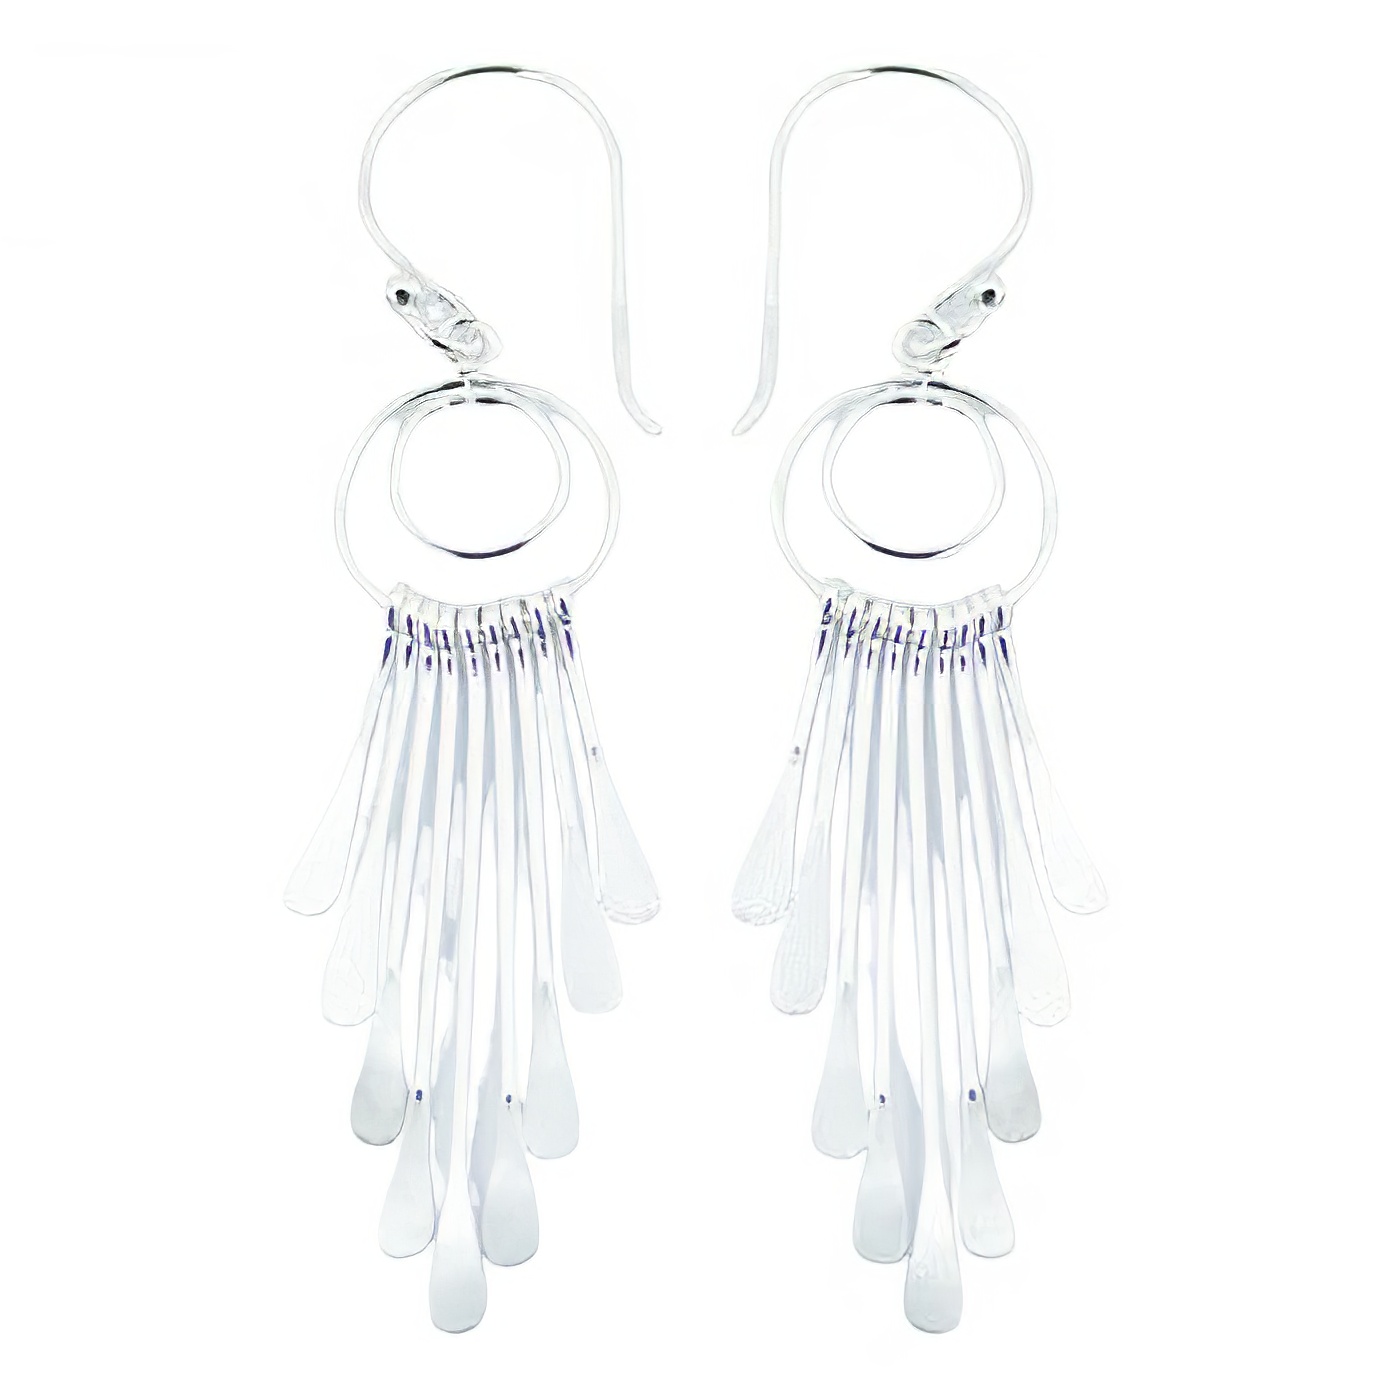 Unmatched Brilliance Plain 925 Silver Chandelier Earrings by BeYindi 